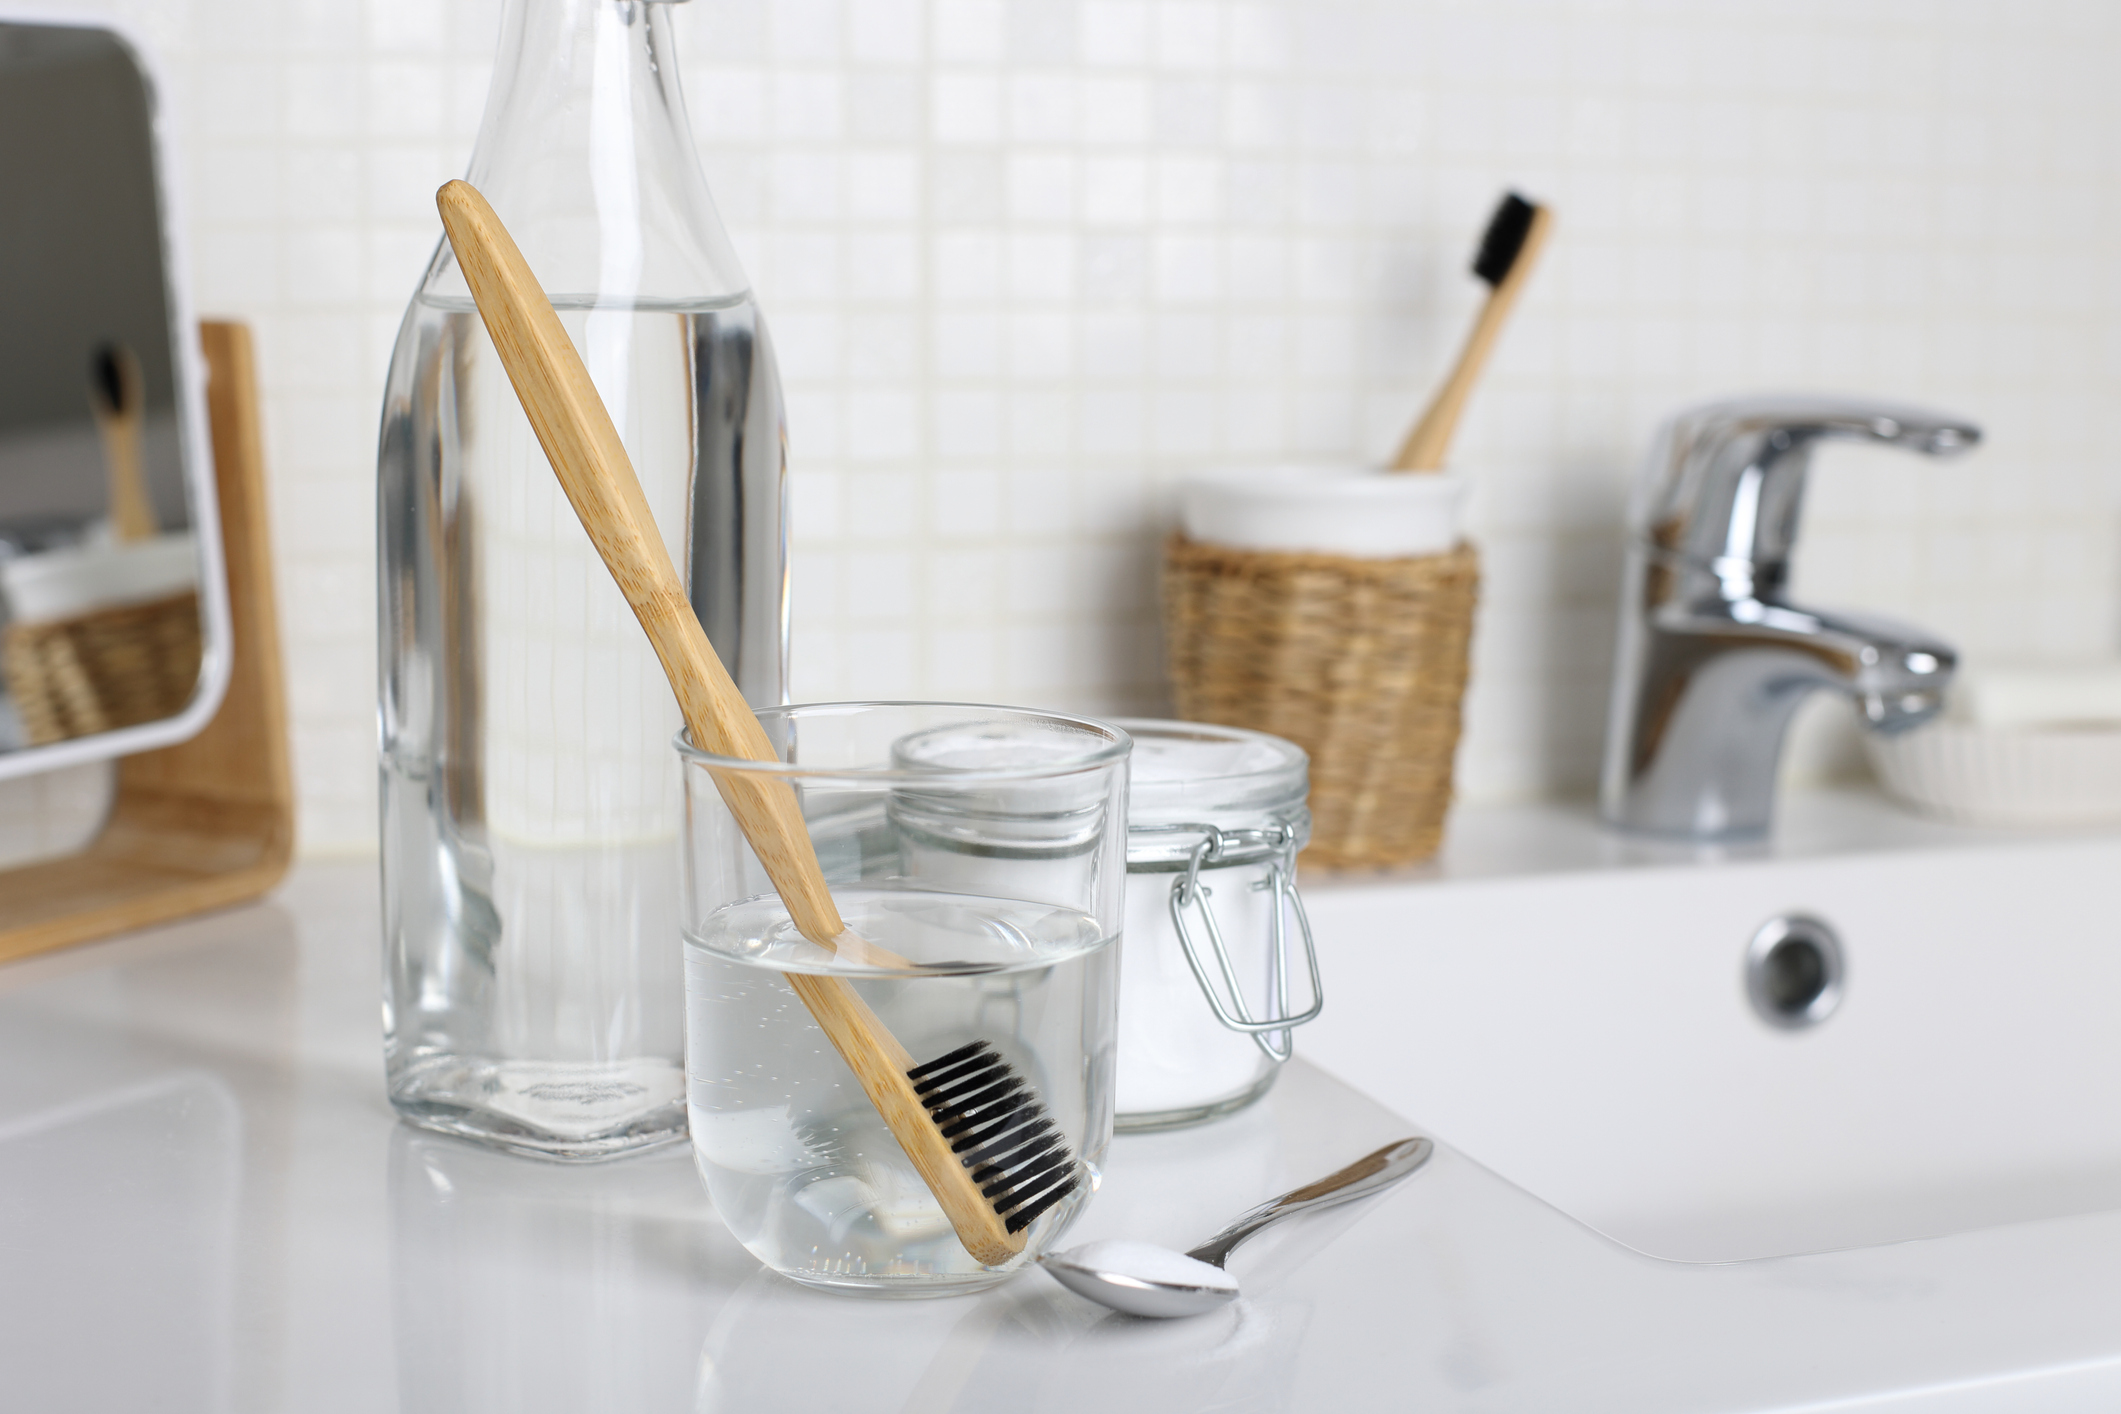 Wash your toothbrush with hot water before and after every usage